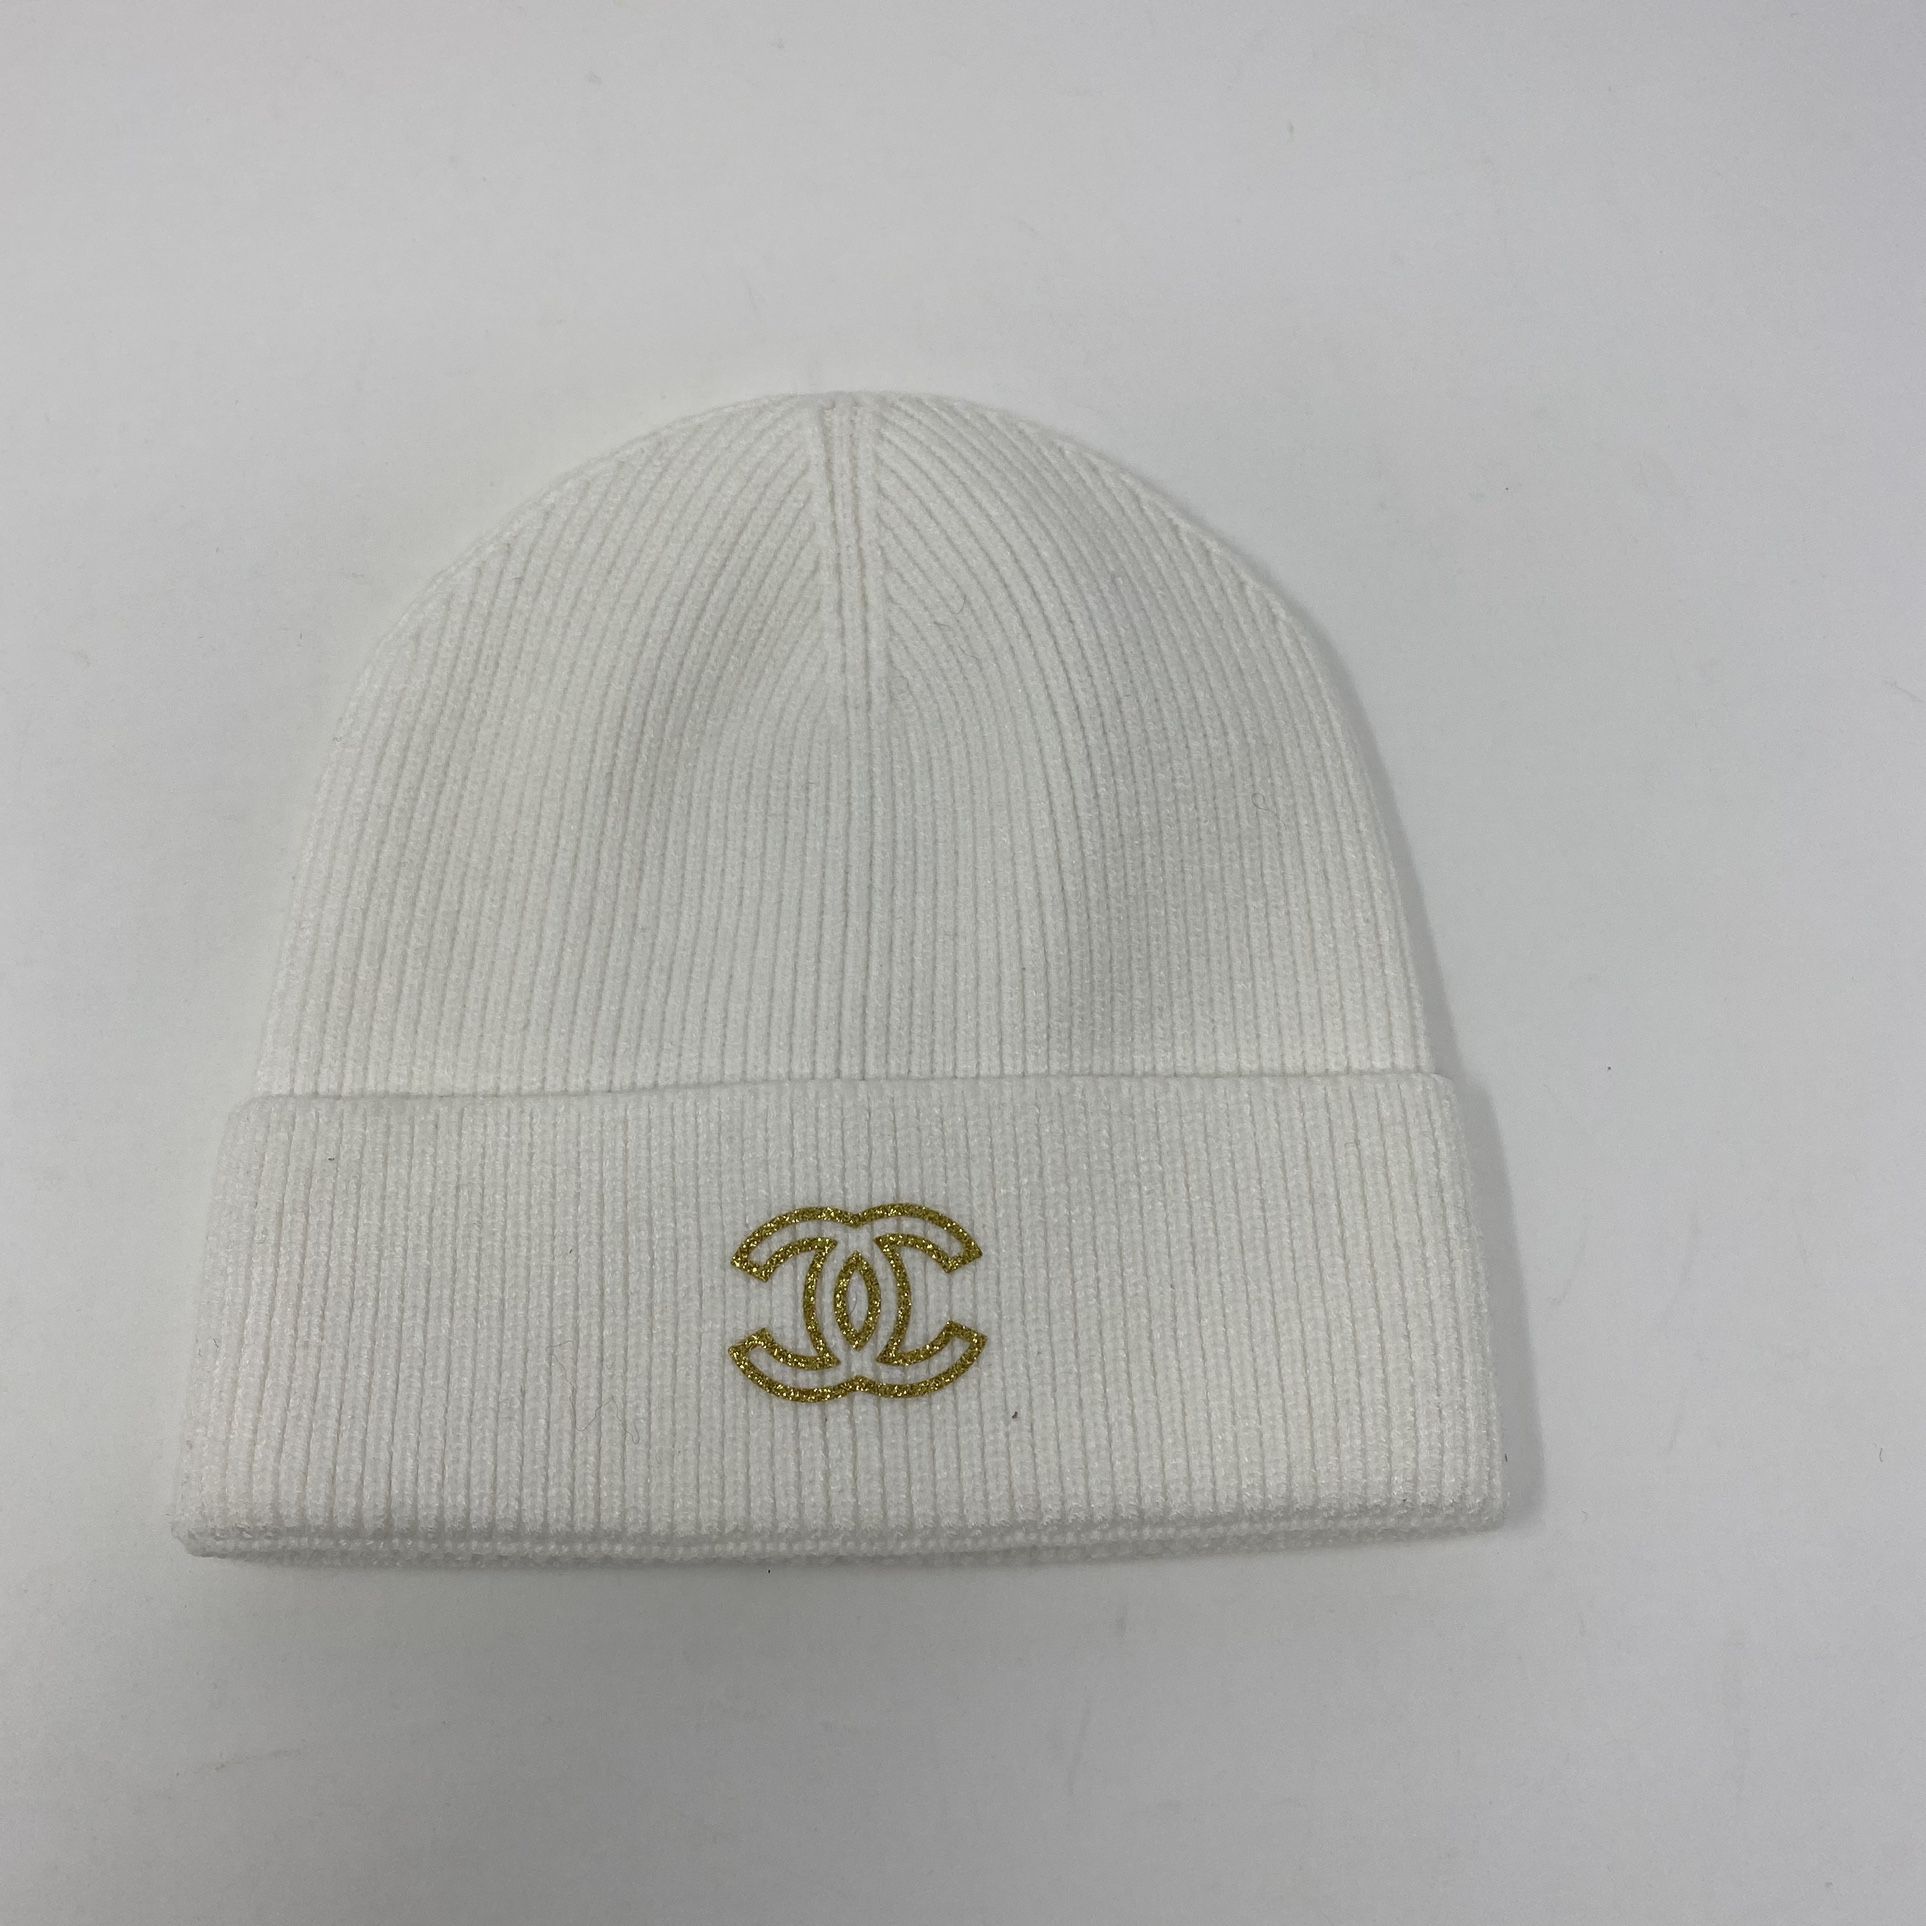 Chanel Beanie Hat for Sale in Brooklyn, NY - OfferUp